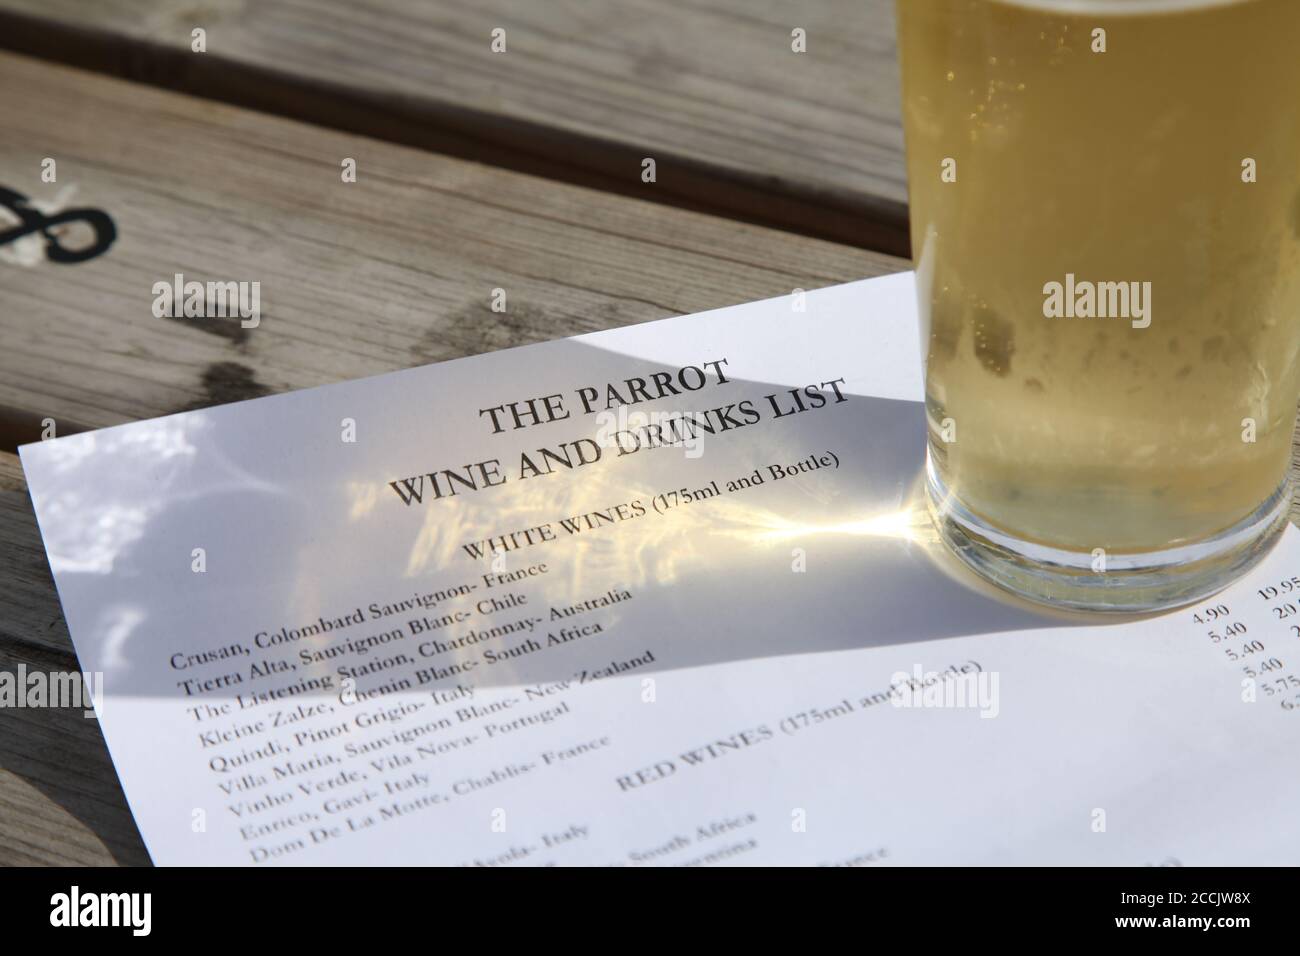 Wine and Drinks list. The Parrot Inn is a public house located in the beautiful village of Forest Green, set deep in the Surrey Hills. August 2020 Stock Photo